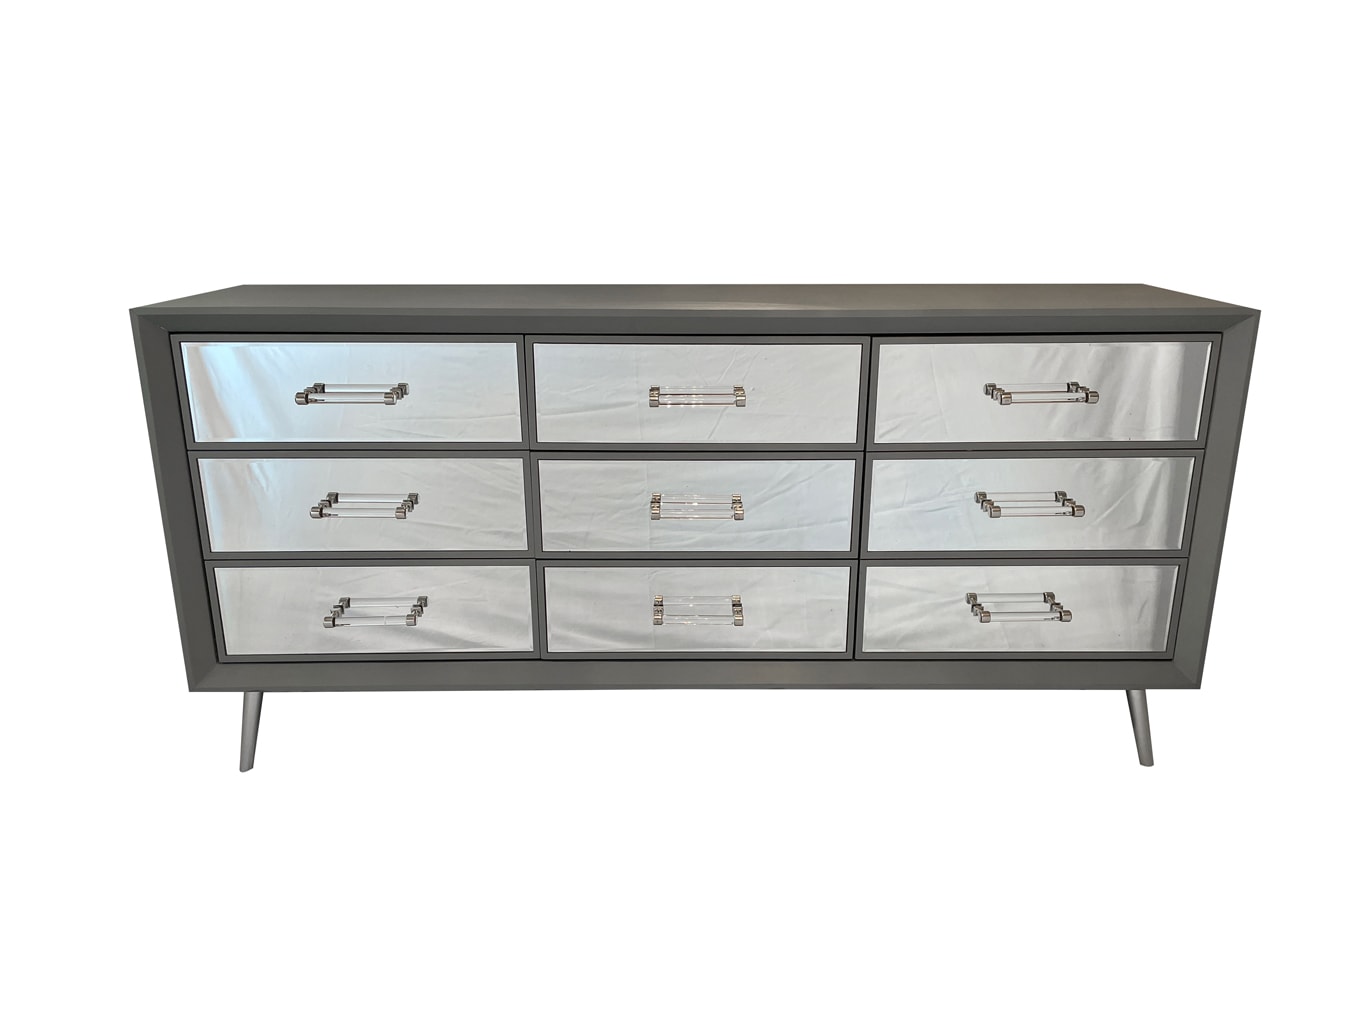 Carnaby mirrored sideboard in grey